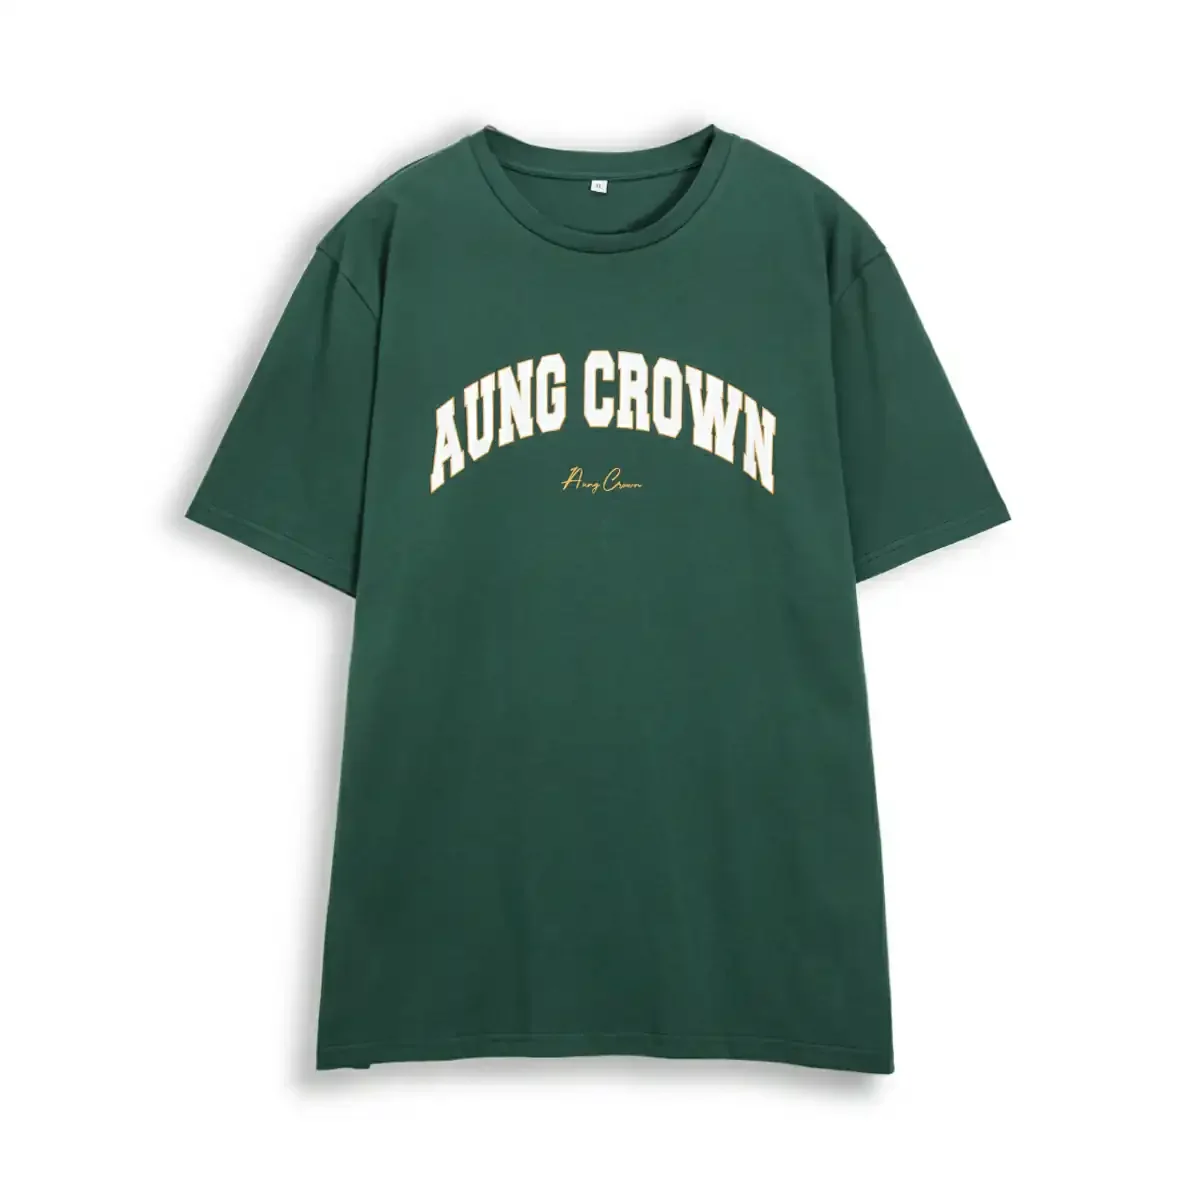 Aung-Crown-green-and-purple-t-shirt-in-green-color-KN2103161